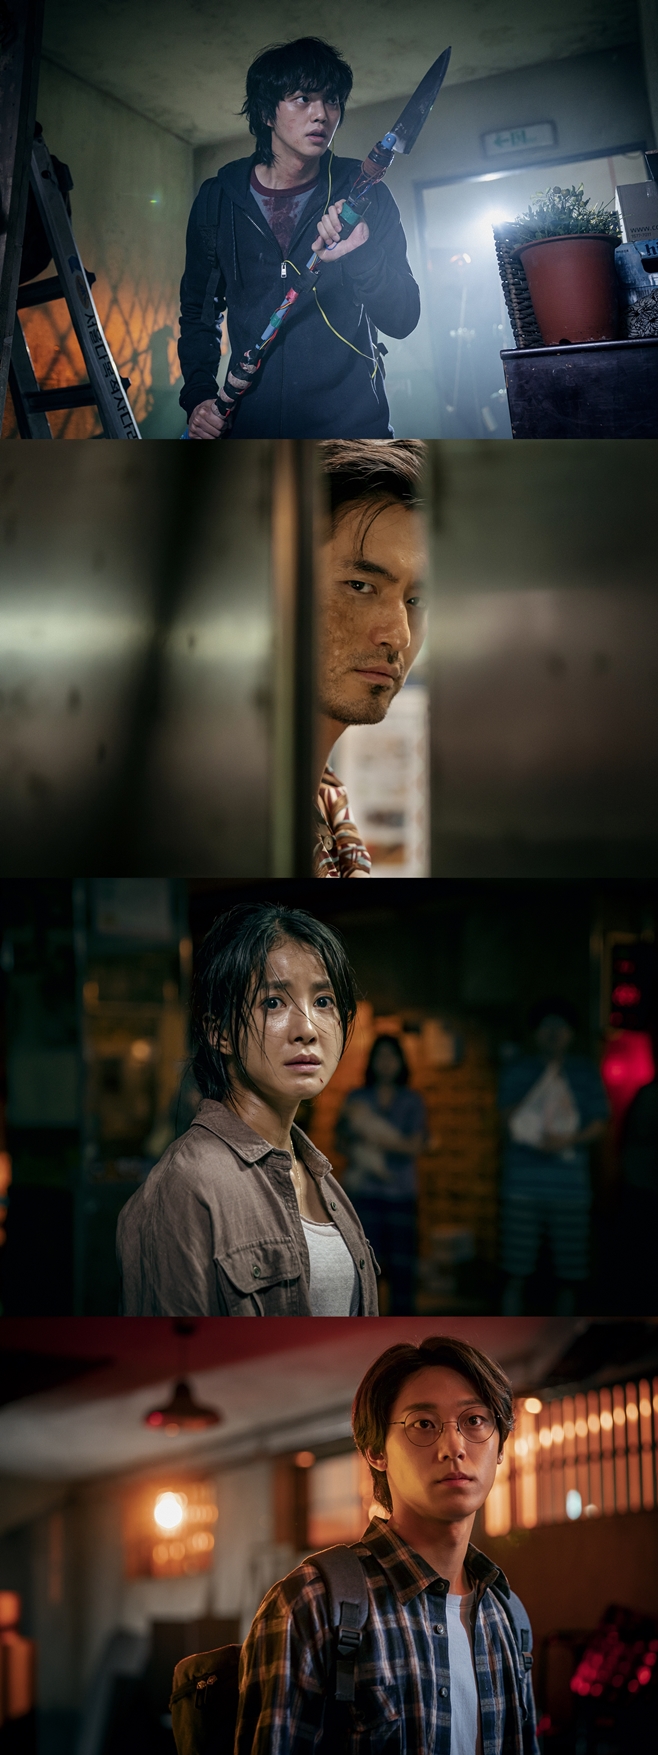 Sweet Home finally took off its veil.On the 19th, Netflix confirmed the release date of the new original series Sweet Home (playplayplay by Hong So-ri and director Lee Eung-bok) on December 18, and released four characters SteelSeries and a teaser video.Sweet Home is a work that depicts the bizarre and shocking story of Stones in Exile type lonely high school student Hyun Soo (Song Kang) who lost his family and moved to an apartment. It is based on the webtoon of the same name by Kim Kanbi and Hwang Young Chan.In this regard, SteelSeries, which was released on the day, featured four people who will lead Sweet Home.First, Song Kang is equipped with a suspicious eye that is disassembled by Stones in Exile type lone suspension, and Lee Jin-wook of the detective Sang-wook station is watching somewhere with sharp eyes.In addition, Lee Seo-young, who plays the role of Seo Kyung, a newly added person in the series, is making a scared expression, and Lee Do-hyun of Green Homes Brain Lee Eun-hyuk is analyzing the situation with a cool expression.The Sweet Home Teaser video, which was released together, also gives overwhelming immersion and thrill at the same time as it starts.Monsters bold camera walking through the green home and the vivid sound of Monsters roar predicted a suspense full of tension.Meanwhile, Sweet Home, which is raising expectations by releasing four characters SteelSeries and a teaser video, will be released on December 18th.